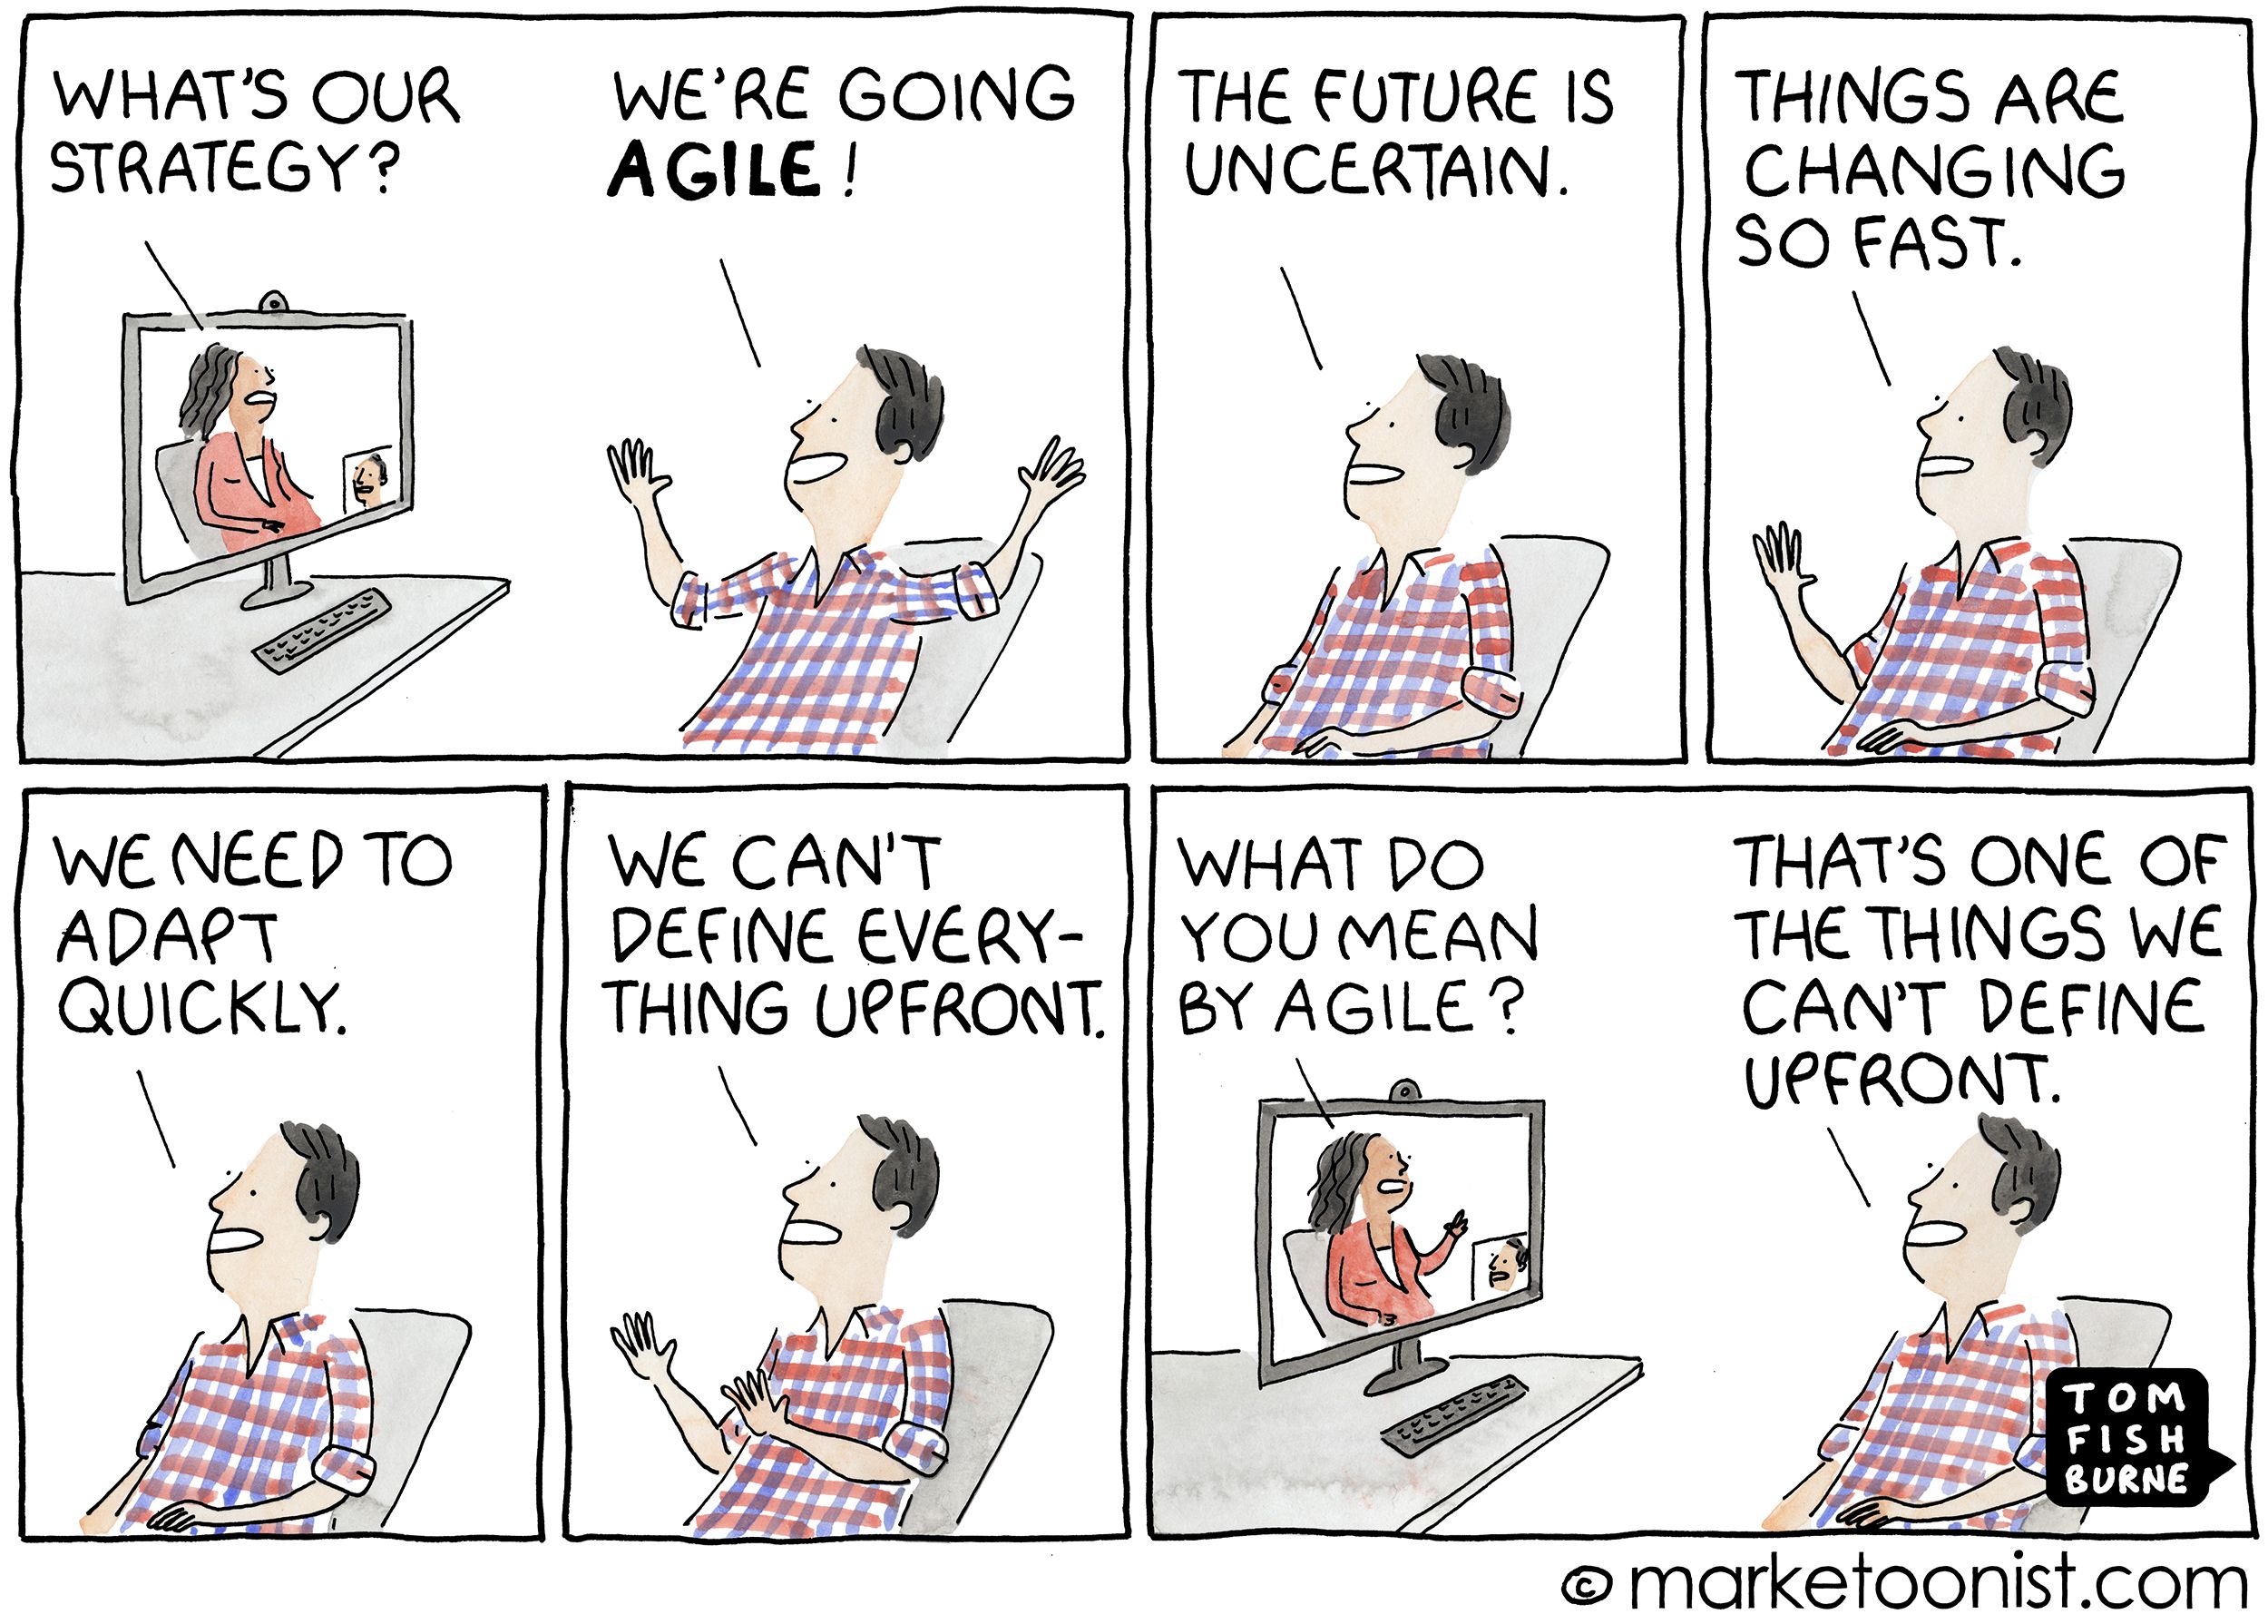 Agile from the Marketoonist